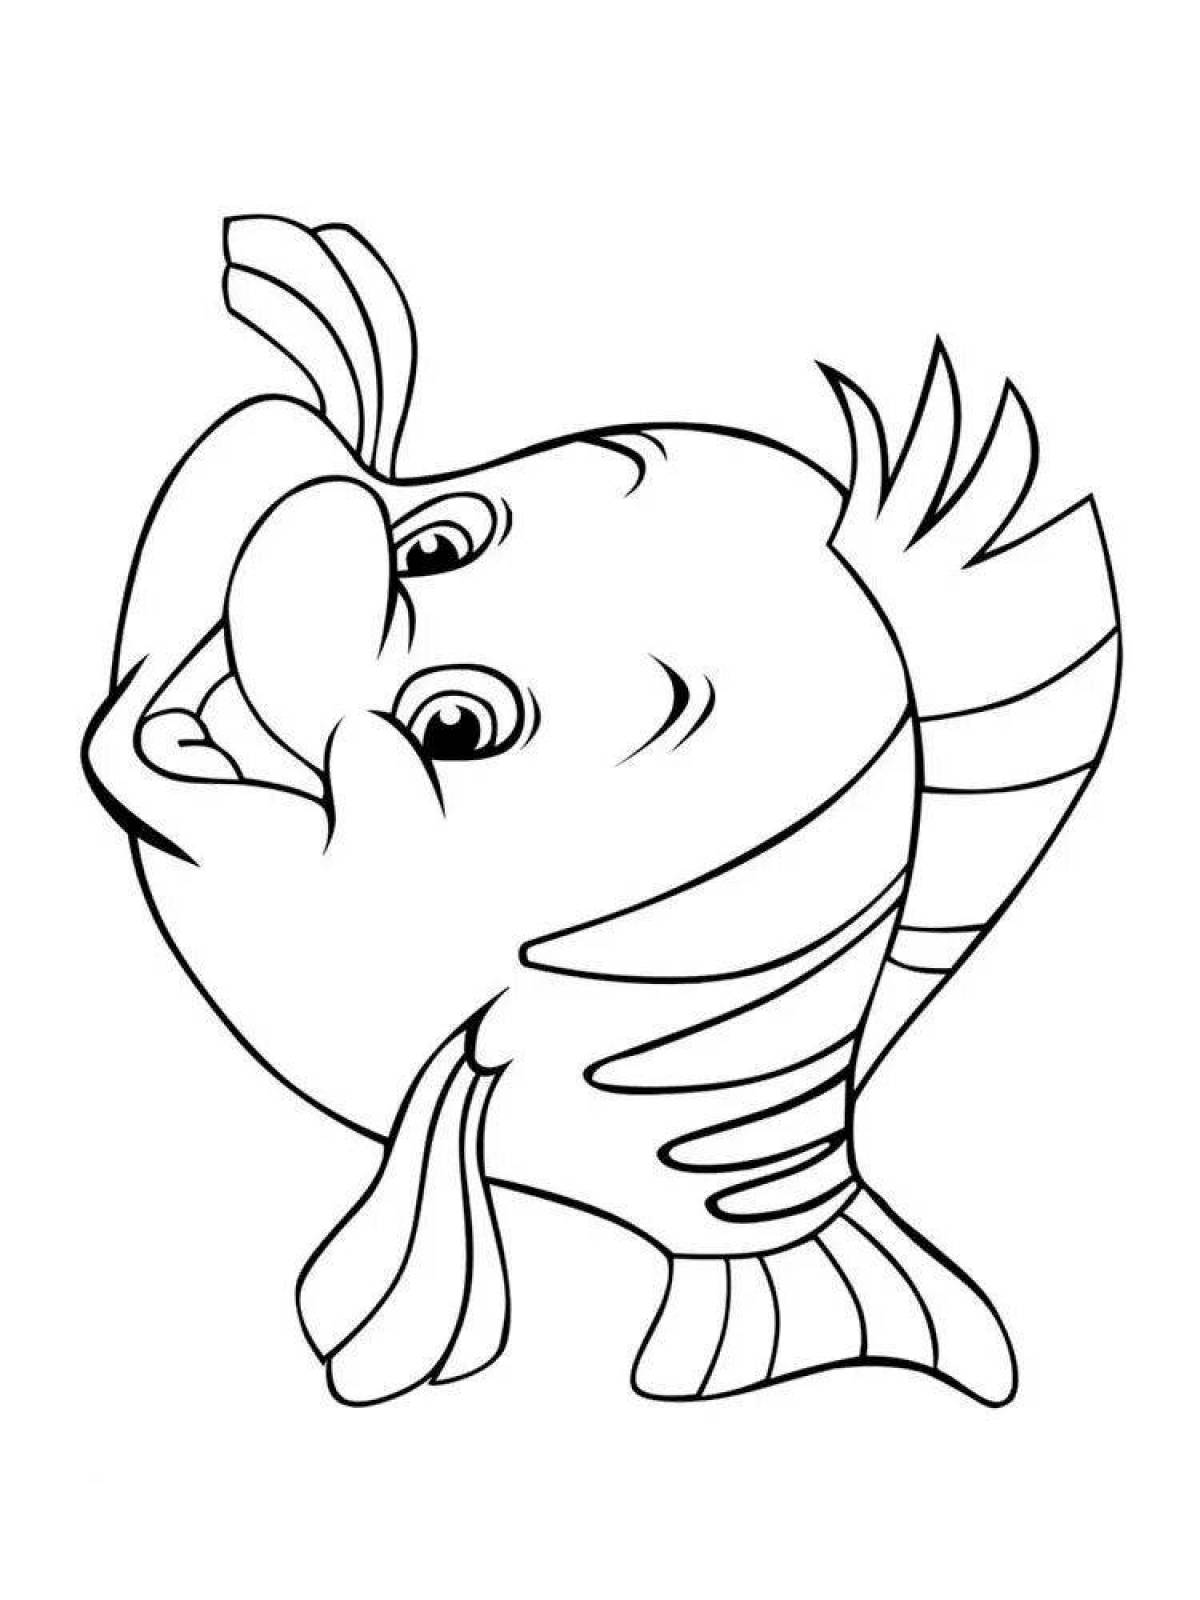 Glowing float coloring page